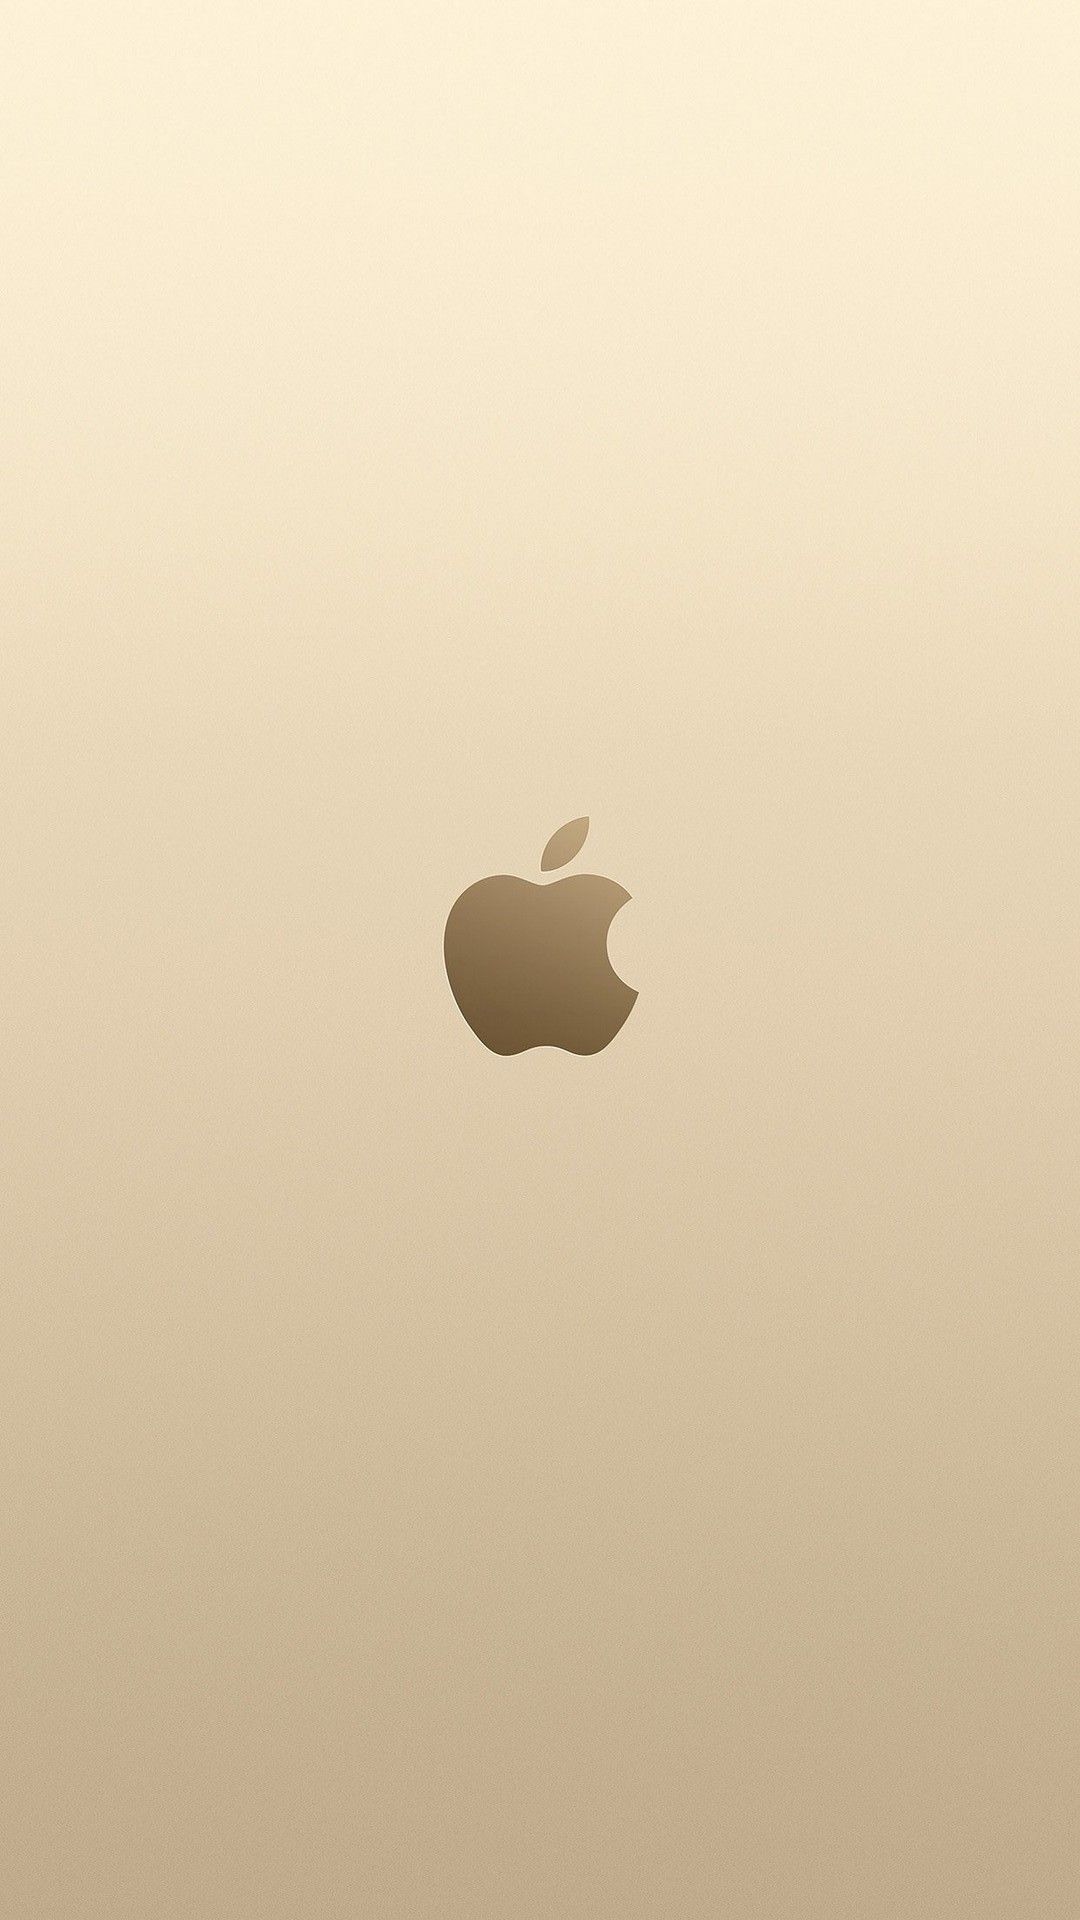 Metallic Gold Wallpaper Android Android Wallpaper. Gold wallpaper iphone, Apple wallpaper iphone, Apple logo wallpaper iphone